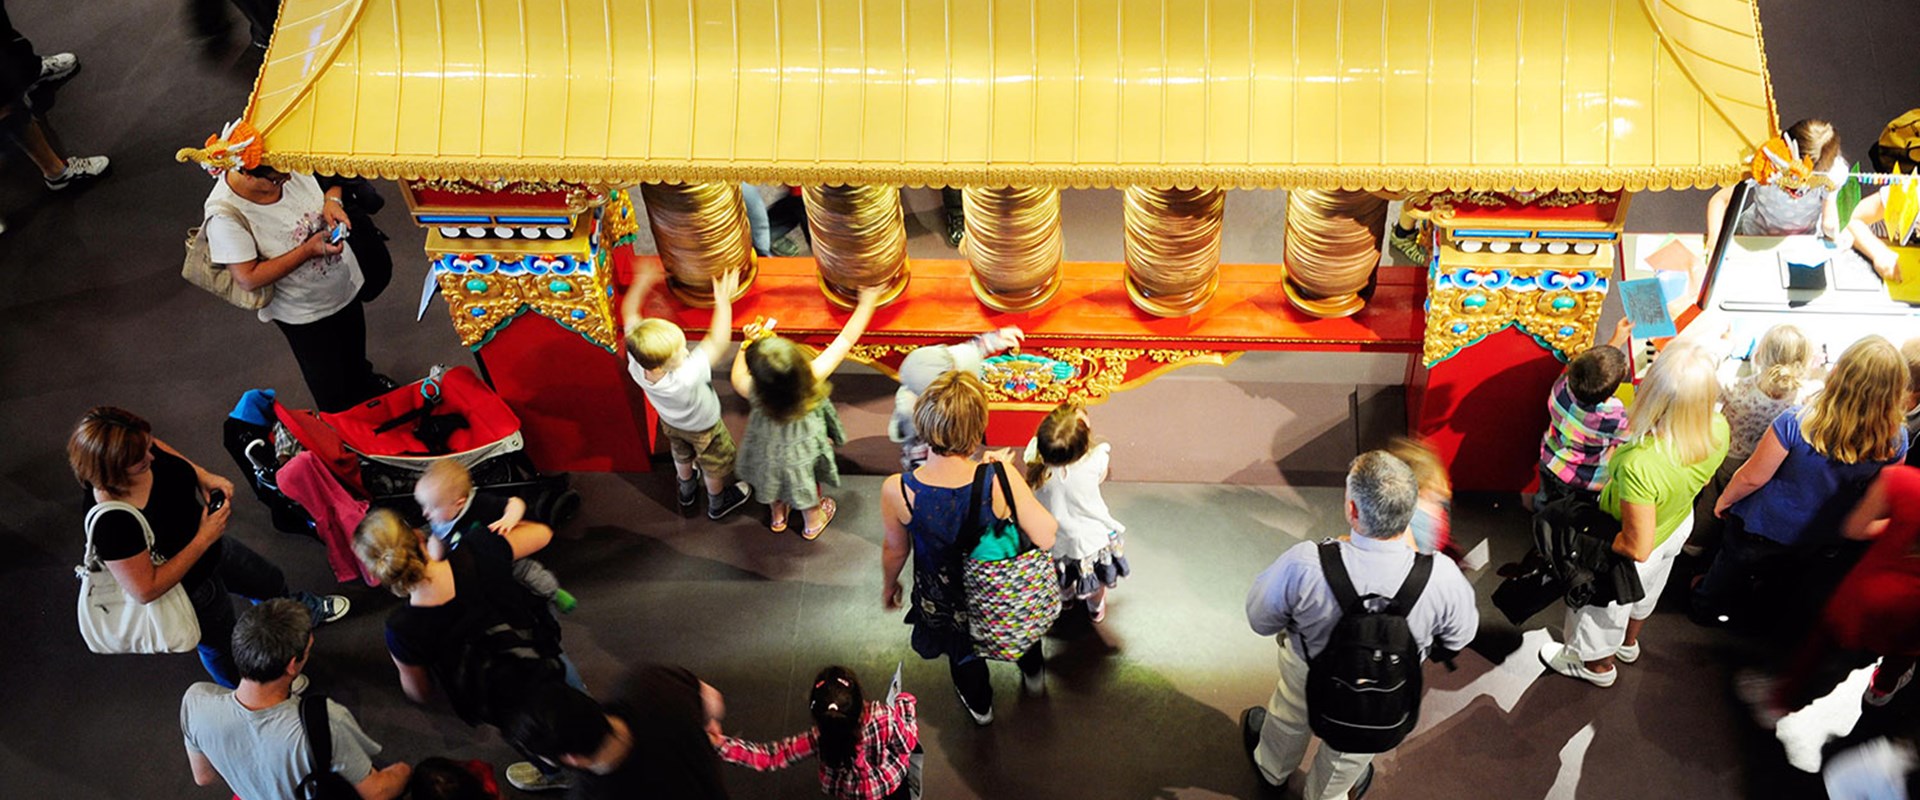 Visitors interact with the Tibetan prayer wheel, on display on Level 1 in the Living Lands gallery